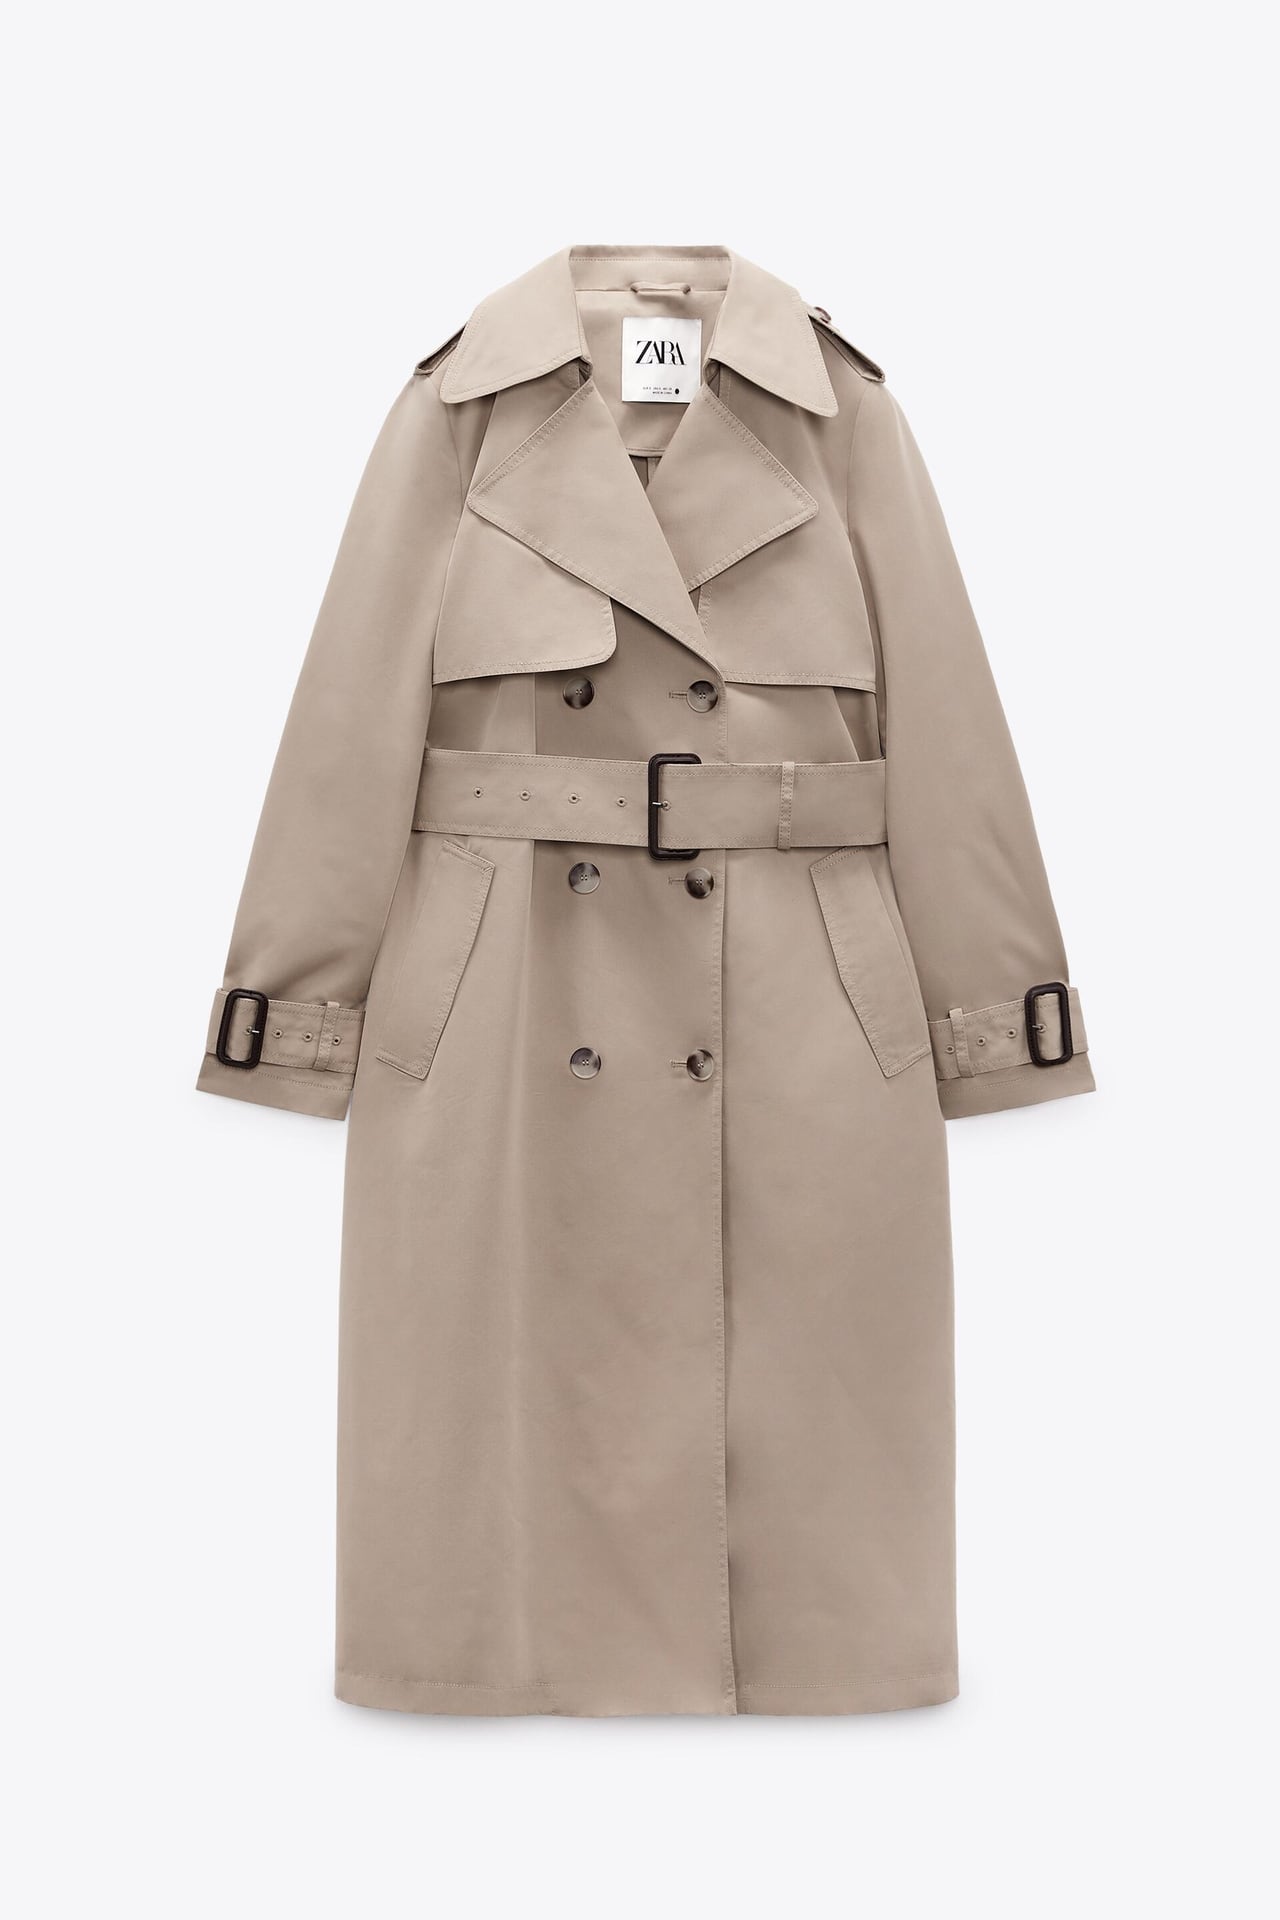 5 Trench-Coat-and-Loafer Outfits I'll Live in This Spring | Who What Wear